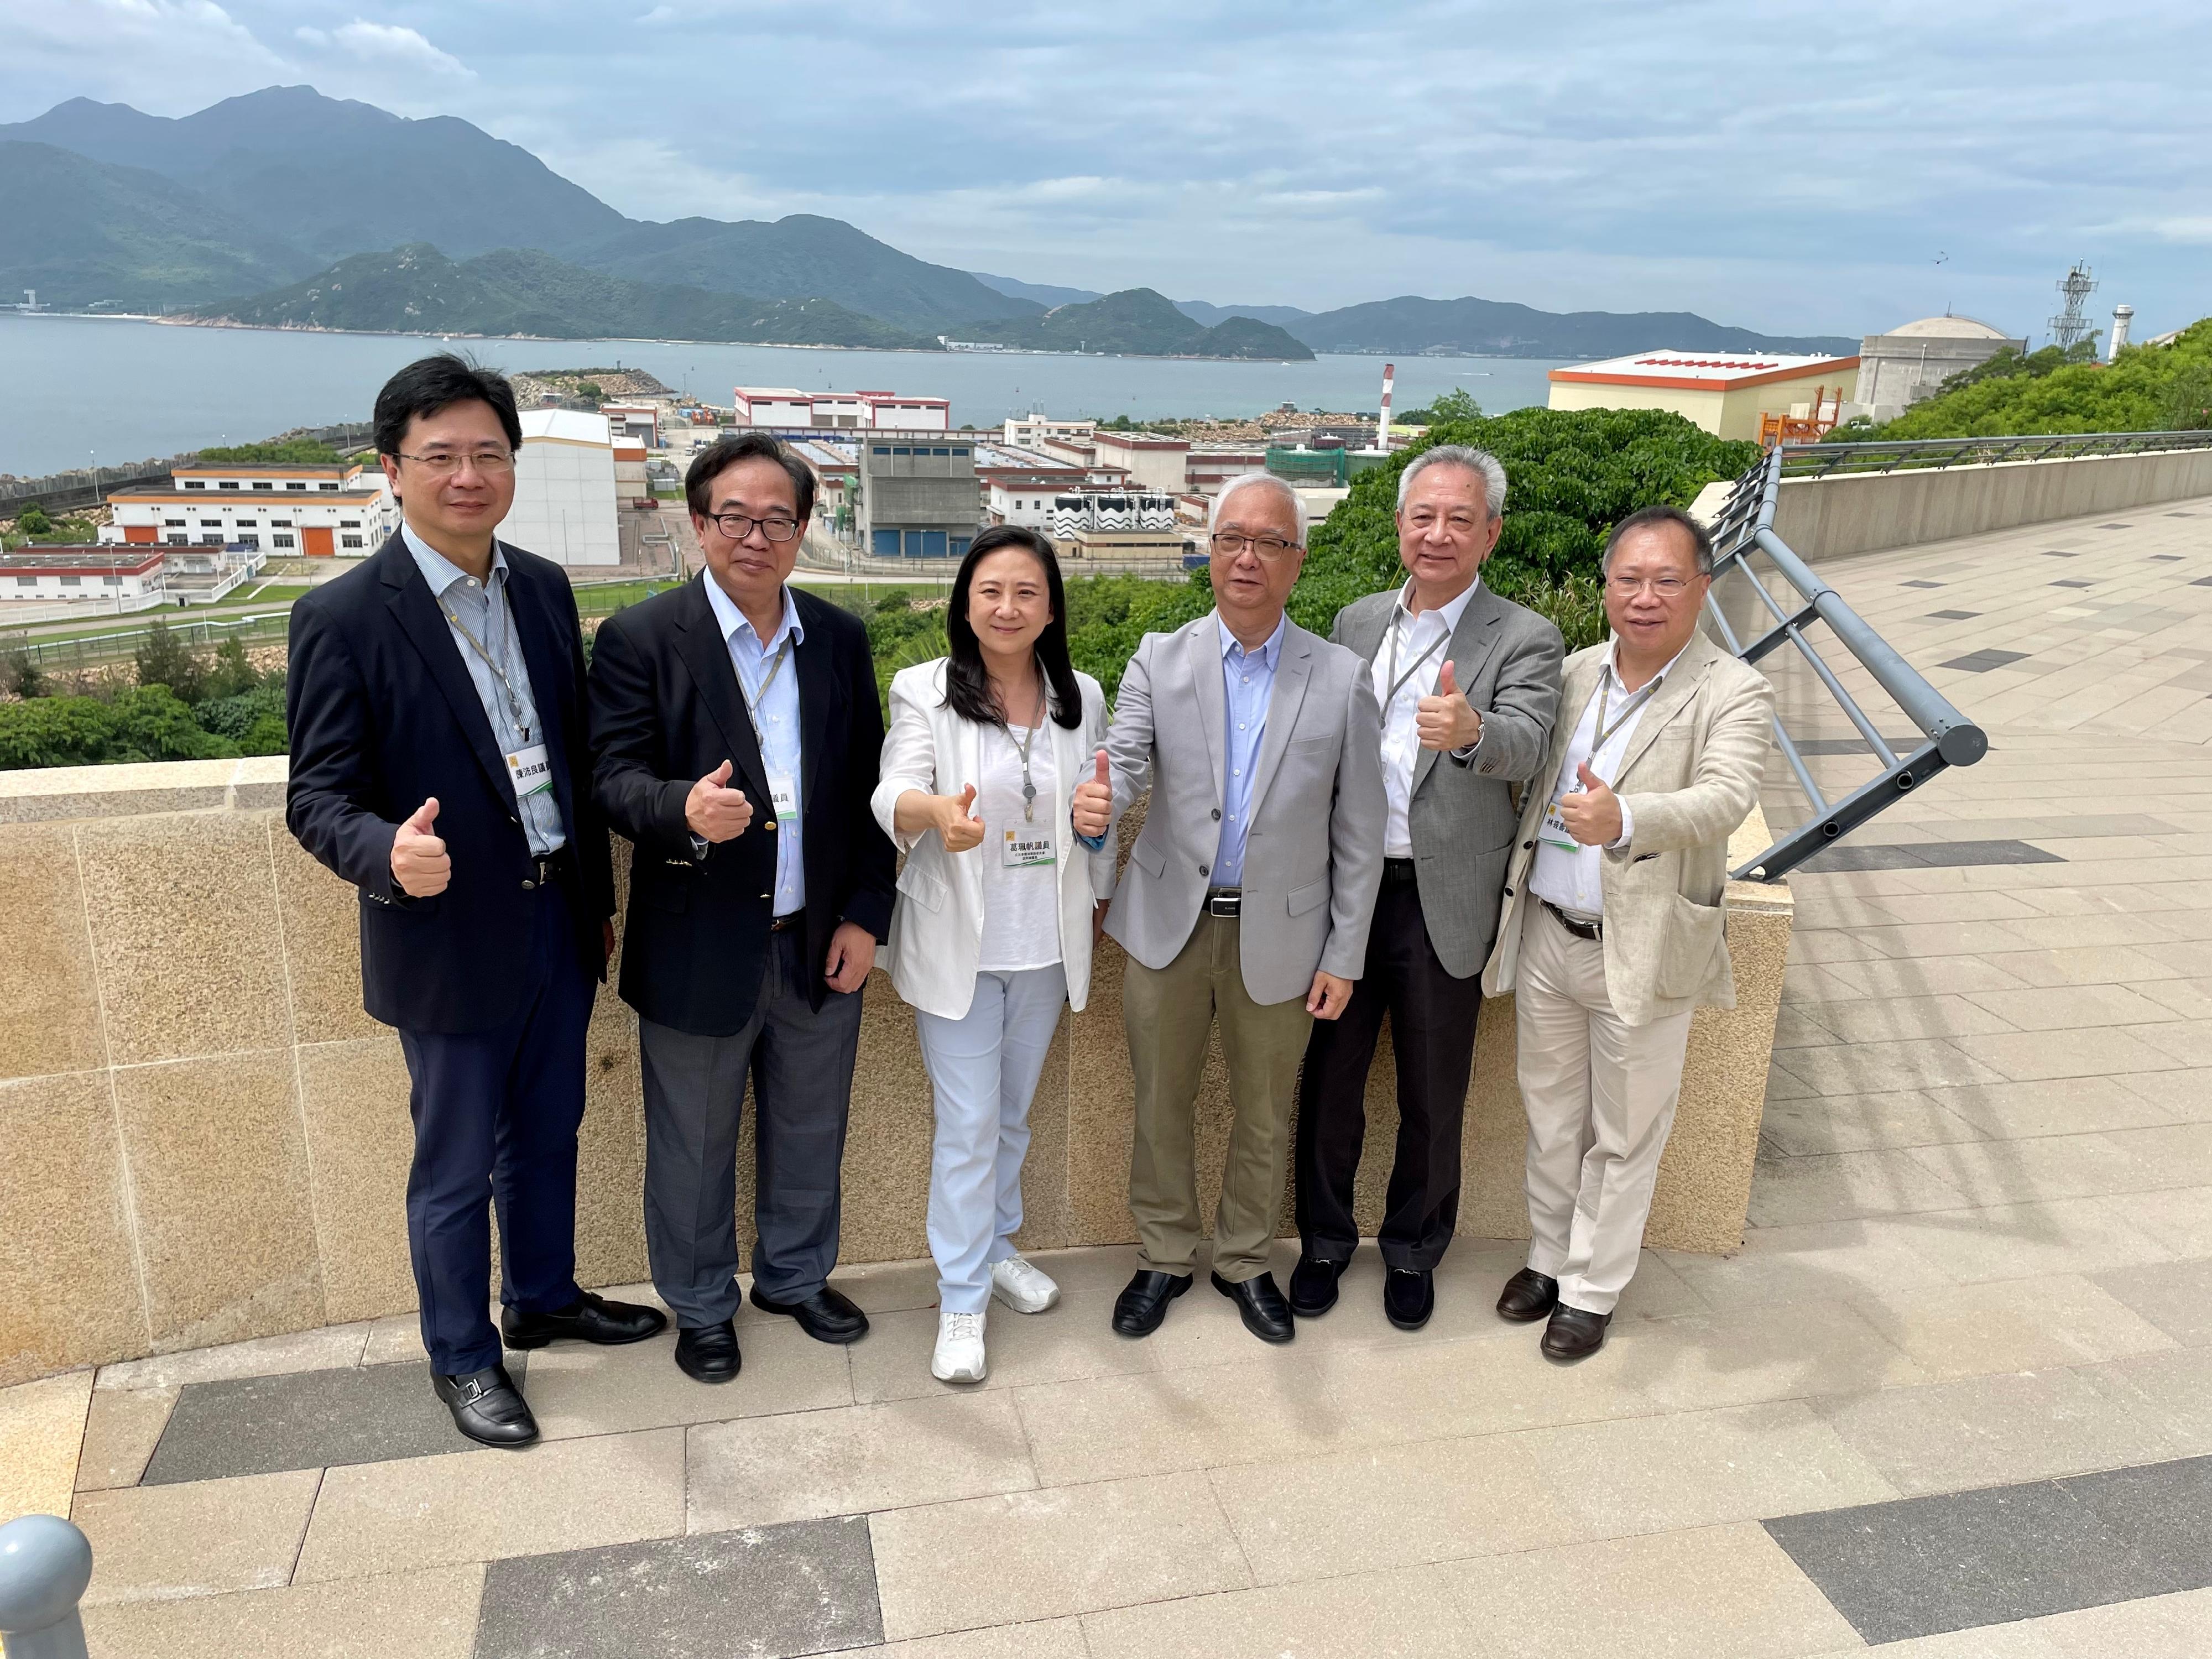 The Secretary for Environment and Ecology, Mr Tse Chin-wan, together with the Legislative Council Panel on Environmental Affairs, today (August 9) visited the Daya Bay Nuclear Power Station in the morning and listened to a briefing on the production of nuclear power and the development of nuclear energy technology in the Mainland. Photo shows Mr Tse (third right) and the delegation of the Legislative Council Panel on Environmental Affairs at the Daya Bay Nuclear Power Station.